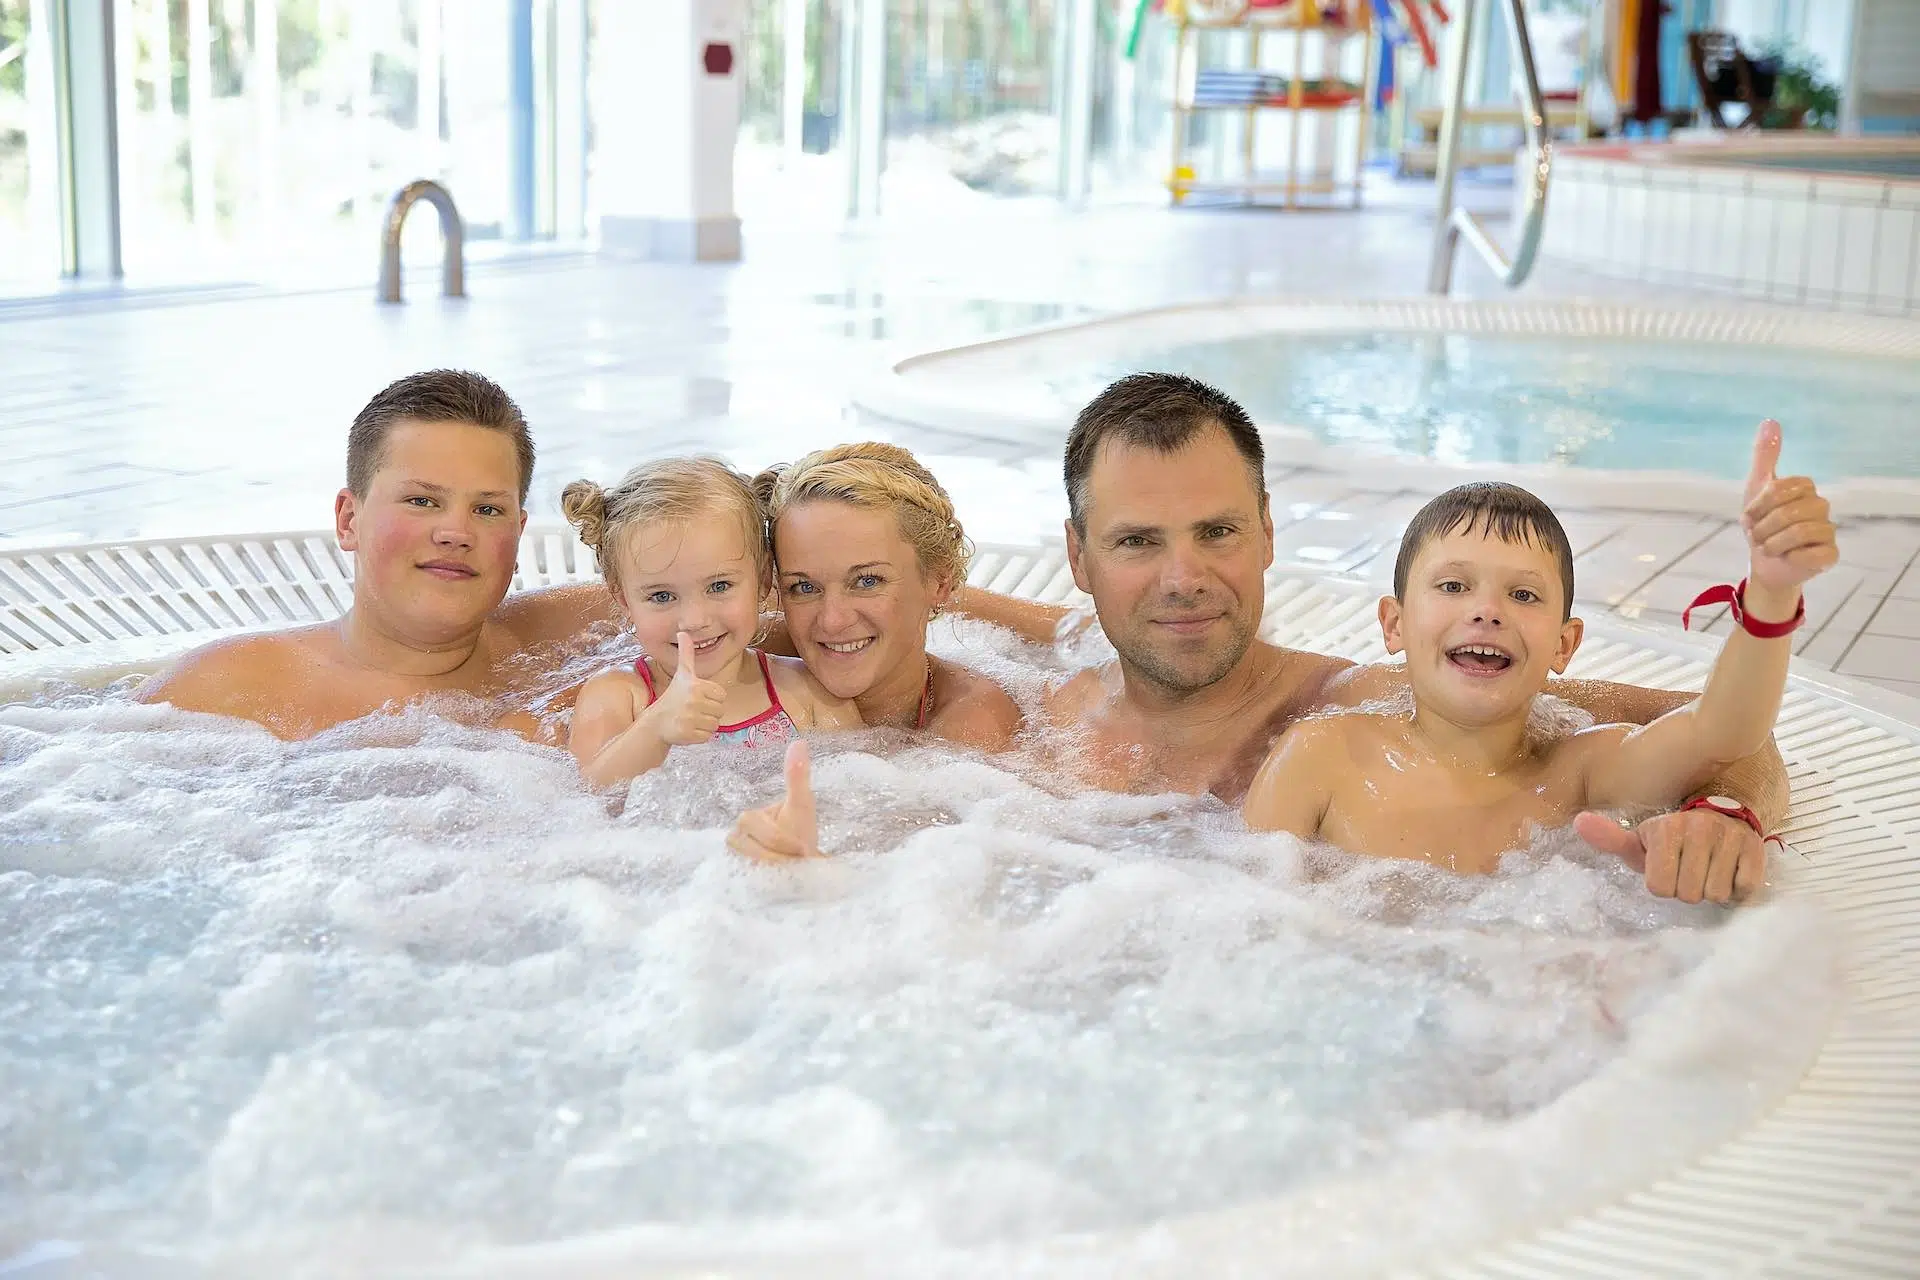 The family at the Aquatic Centre enjoys a hot tub with mineral water at the Värska Health Resort Centre.